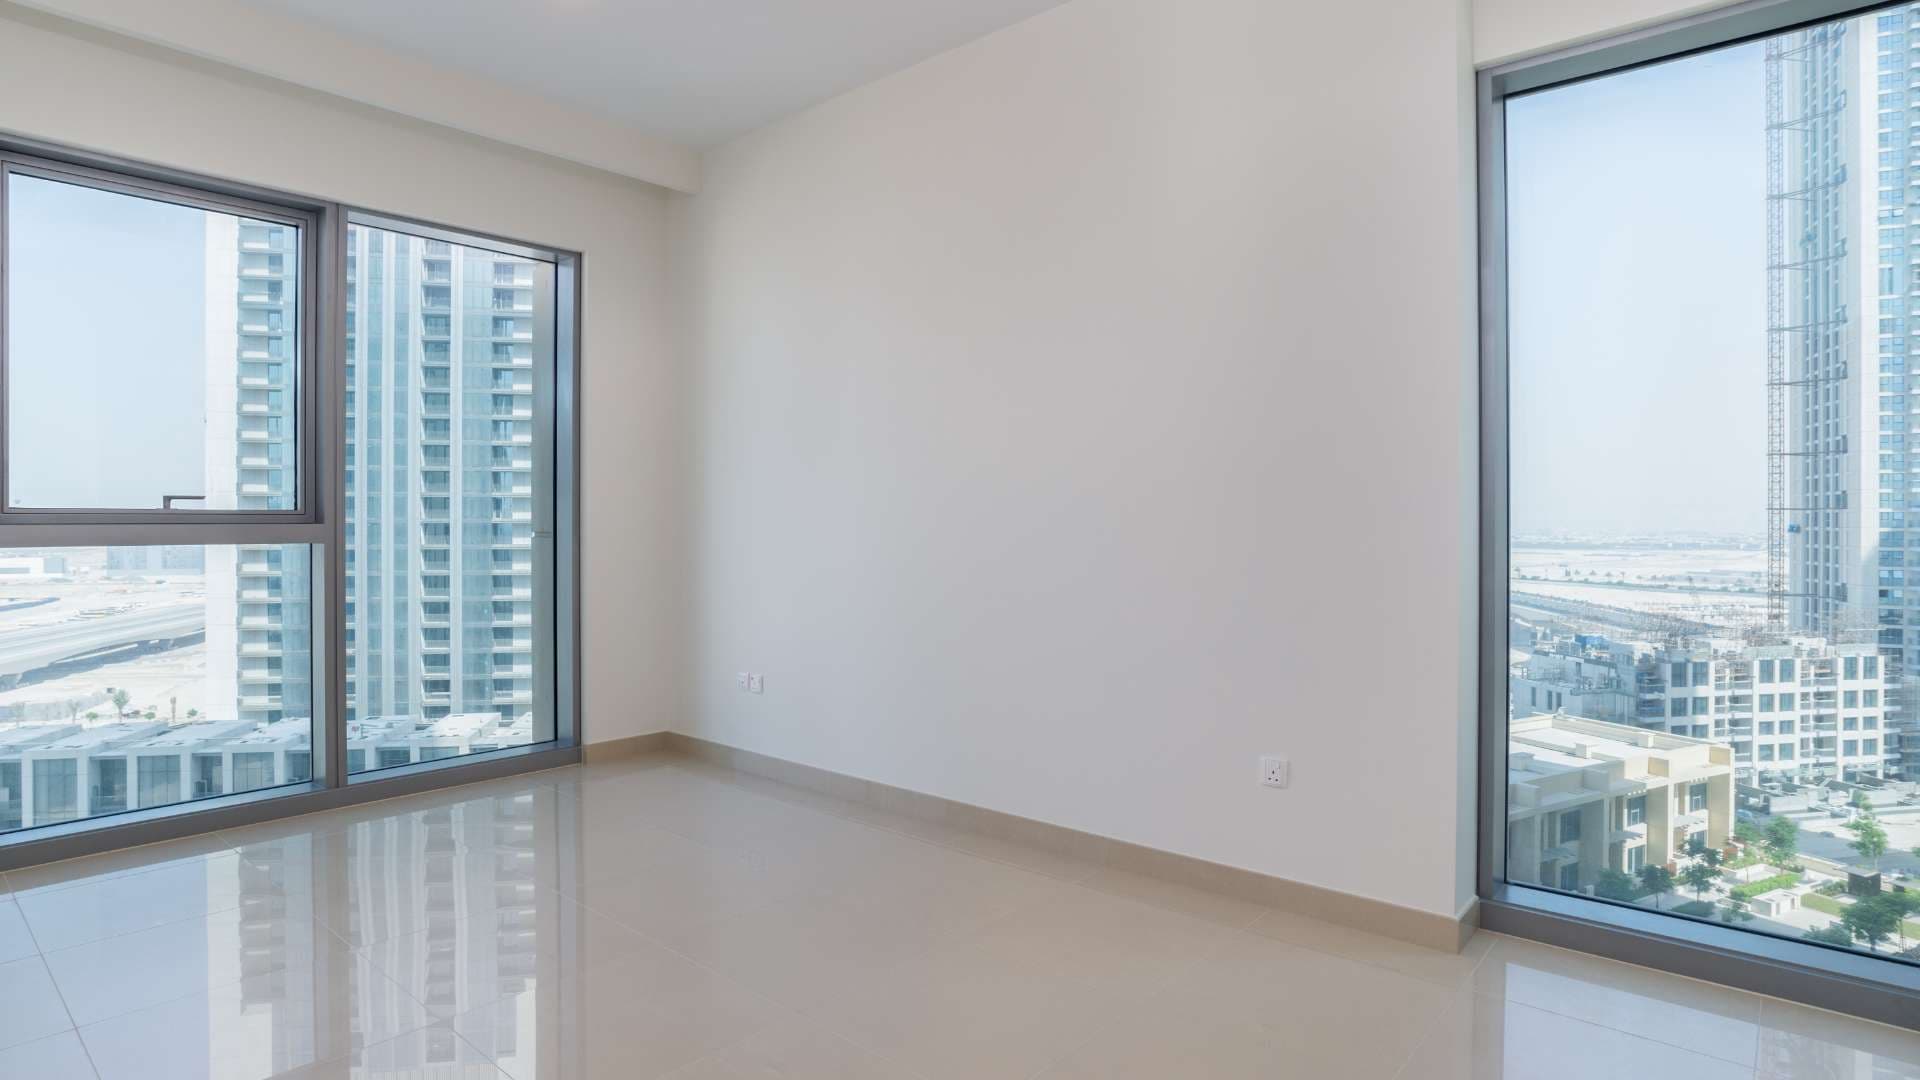 2 Bedroom Apartment For Rent Harbour Views 2 Lp10246 A7adf0244208900.jpg